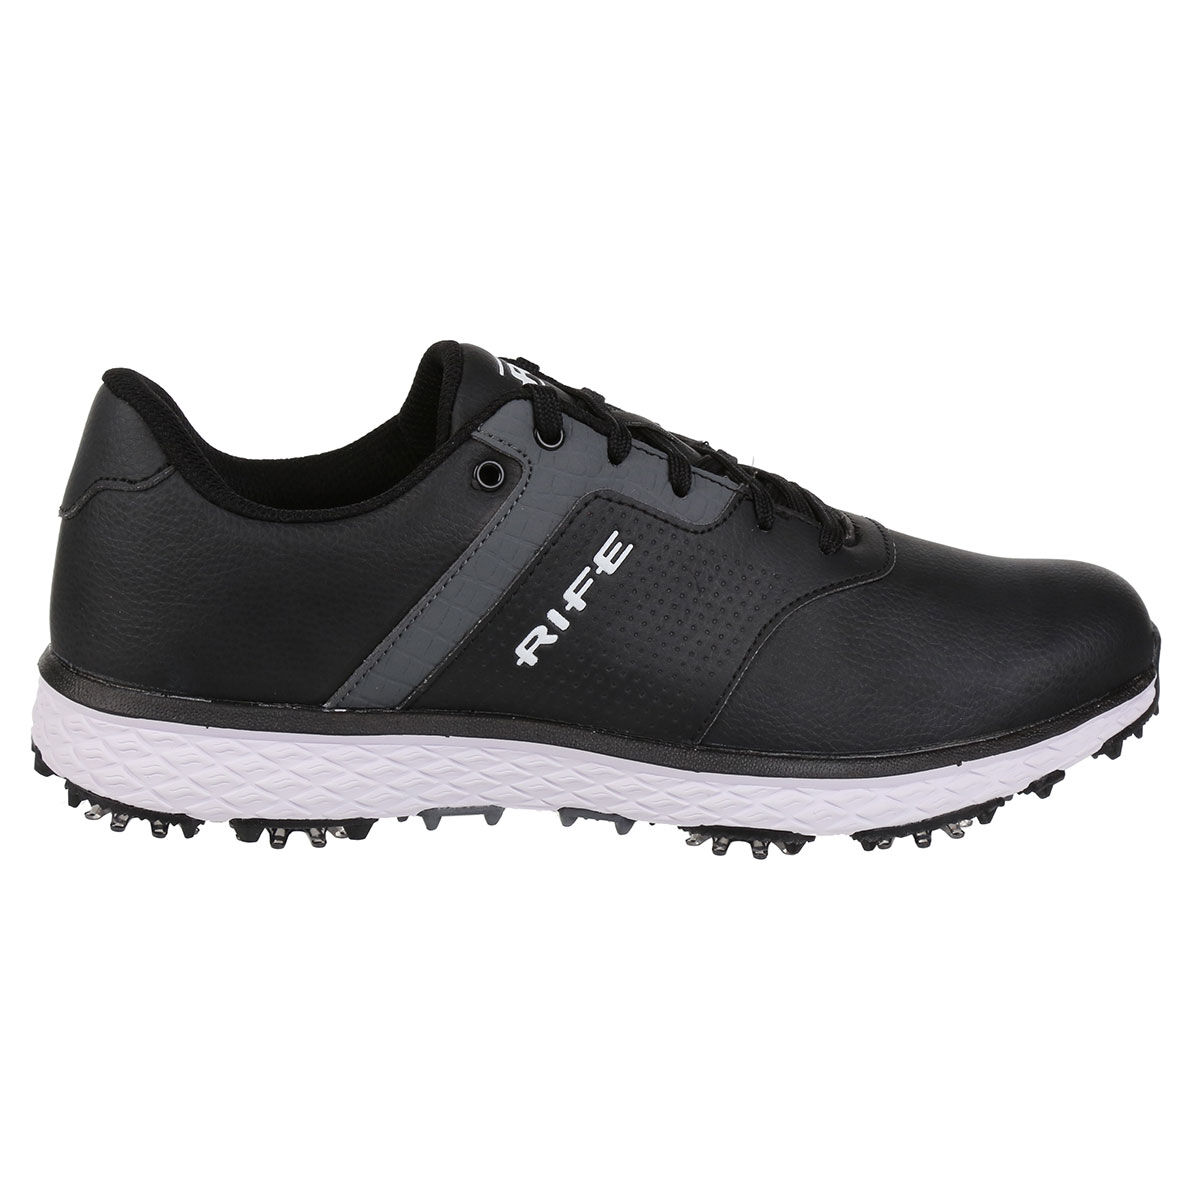 Rife Black and Grey Stylish Striped Lightning Waterproof Spiked Golf Shoes, Size: 8 | American Golf